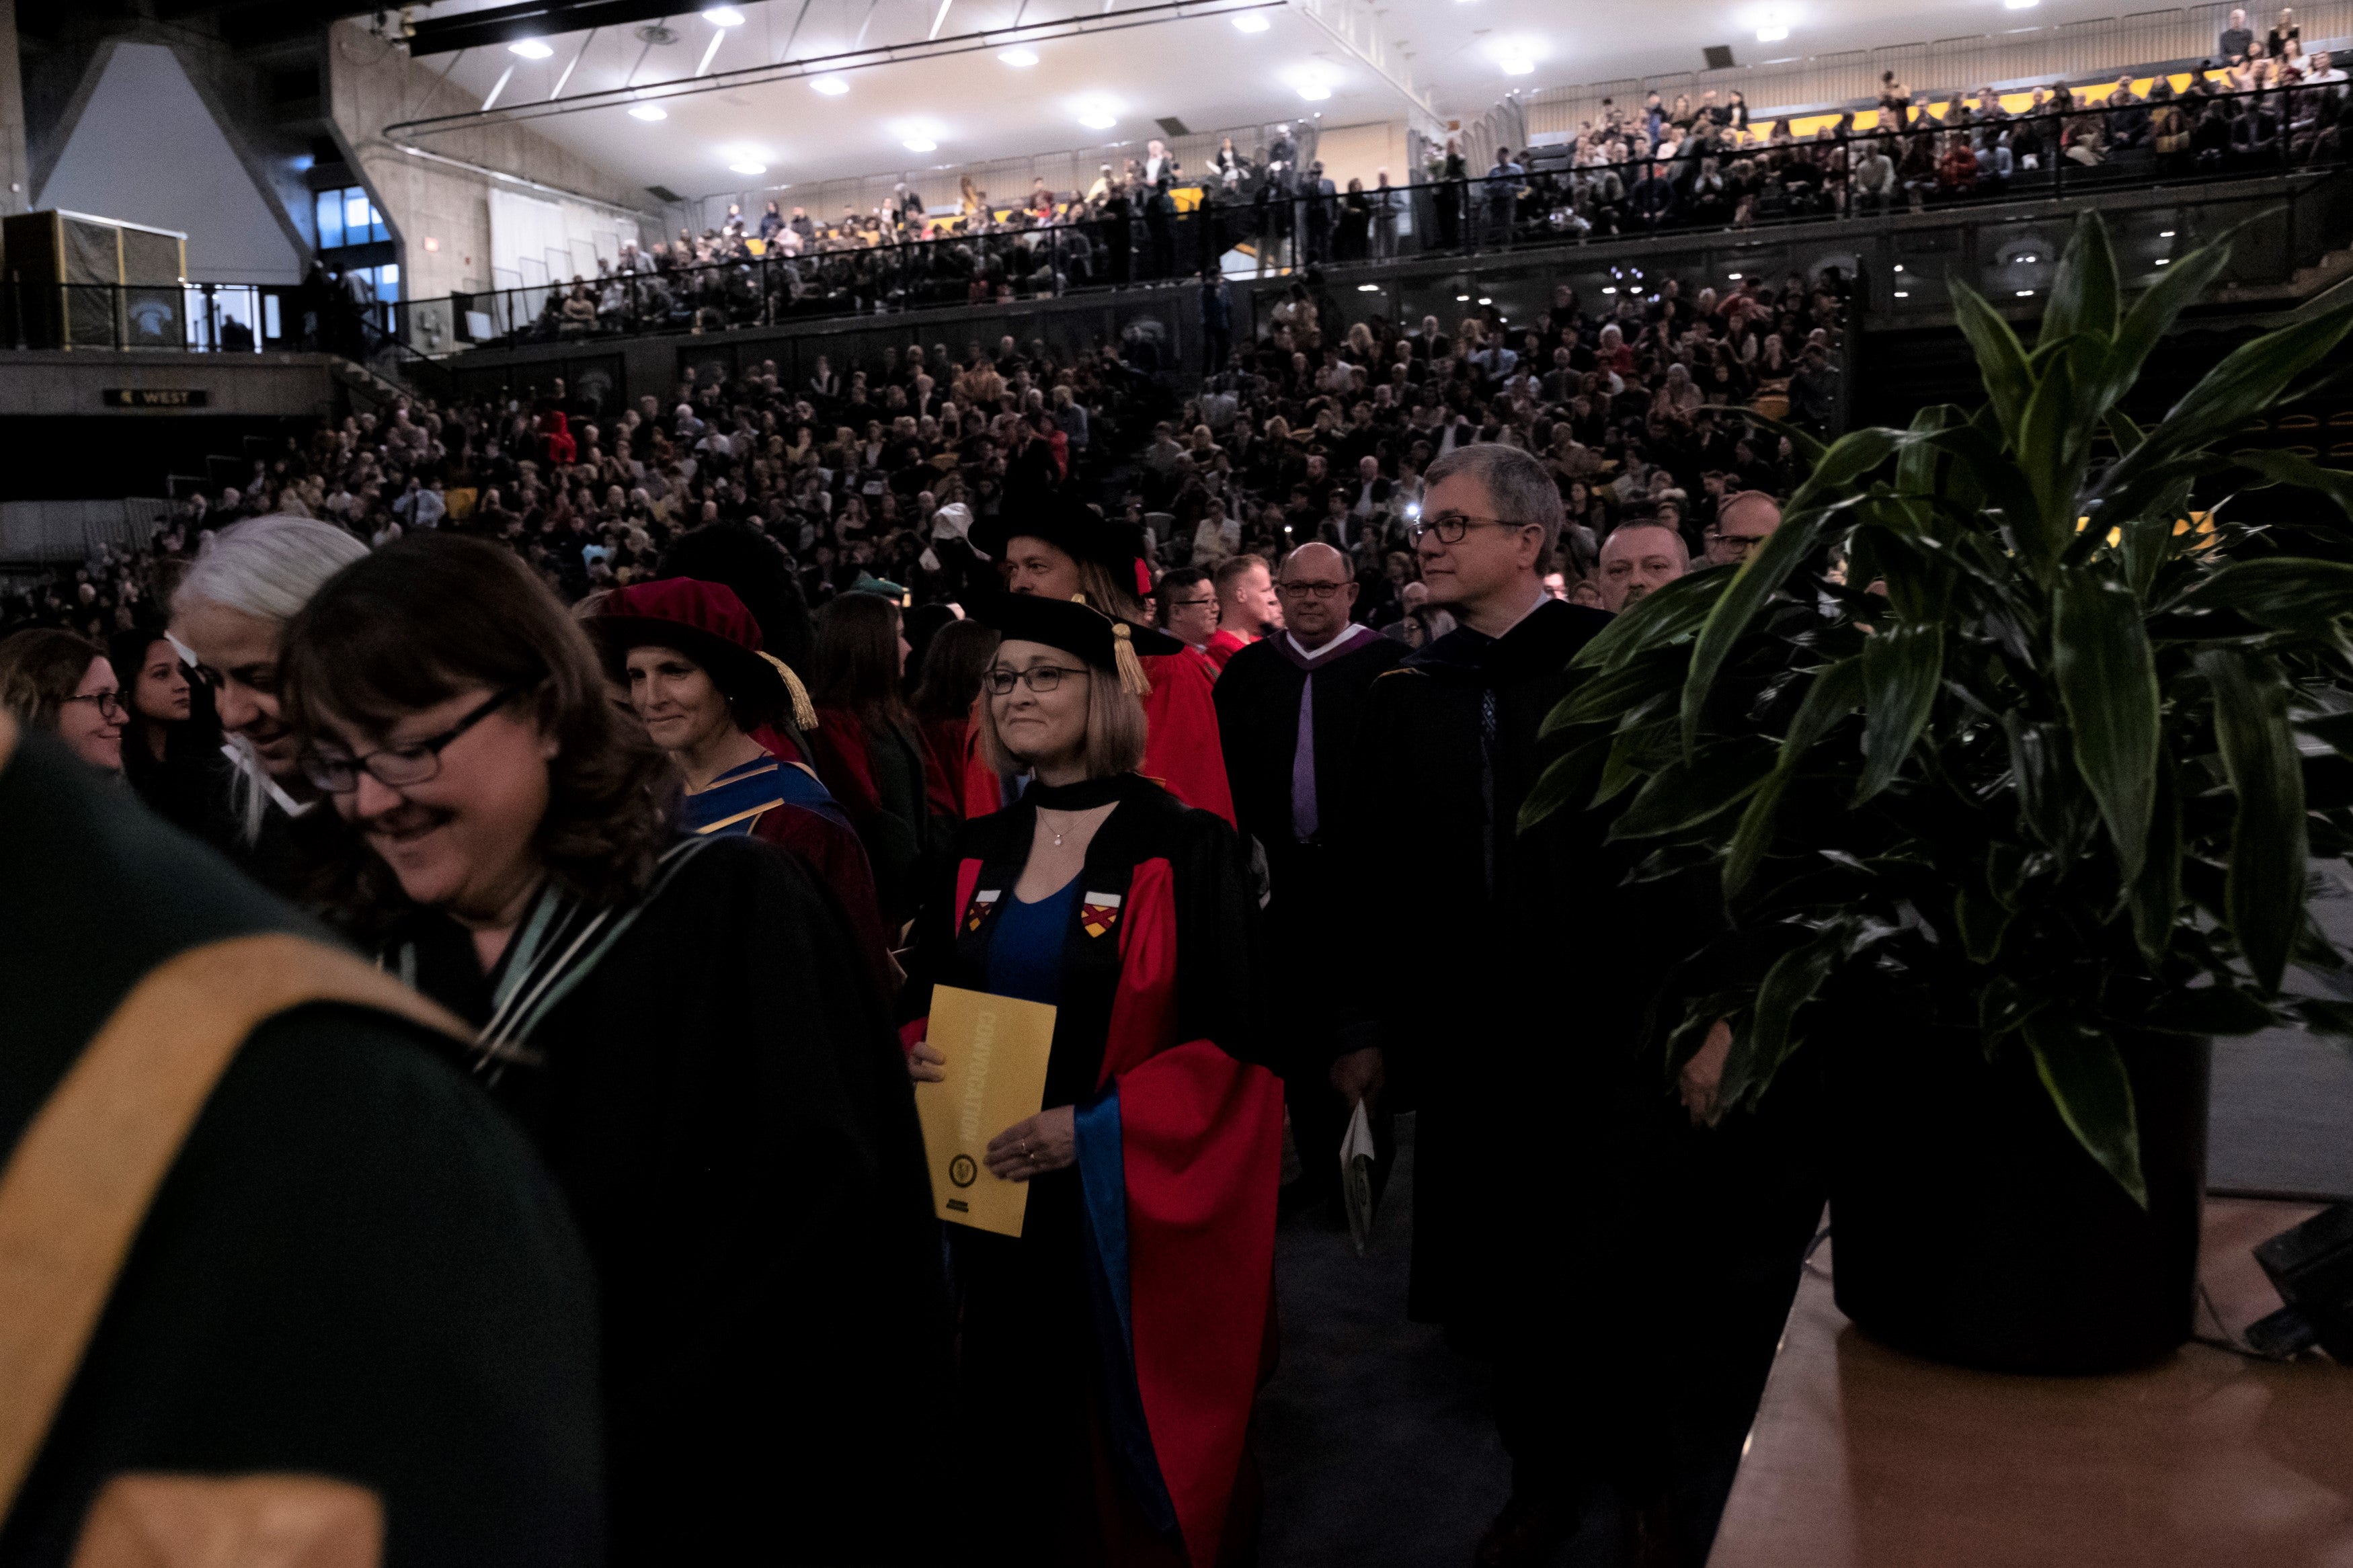 Faculty procession enetering the ceremony